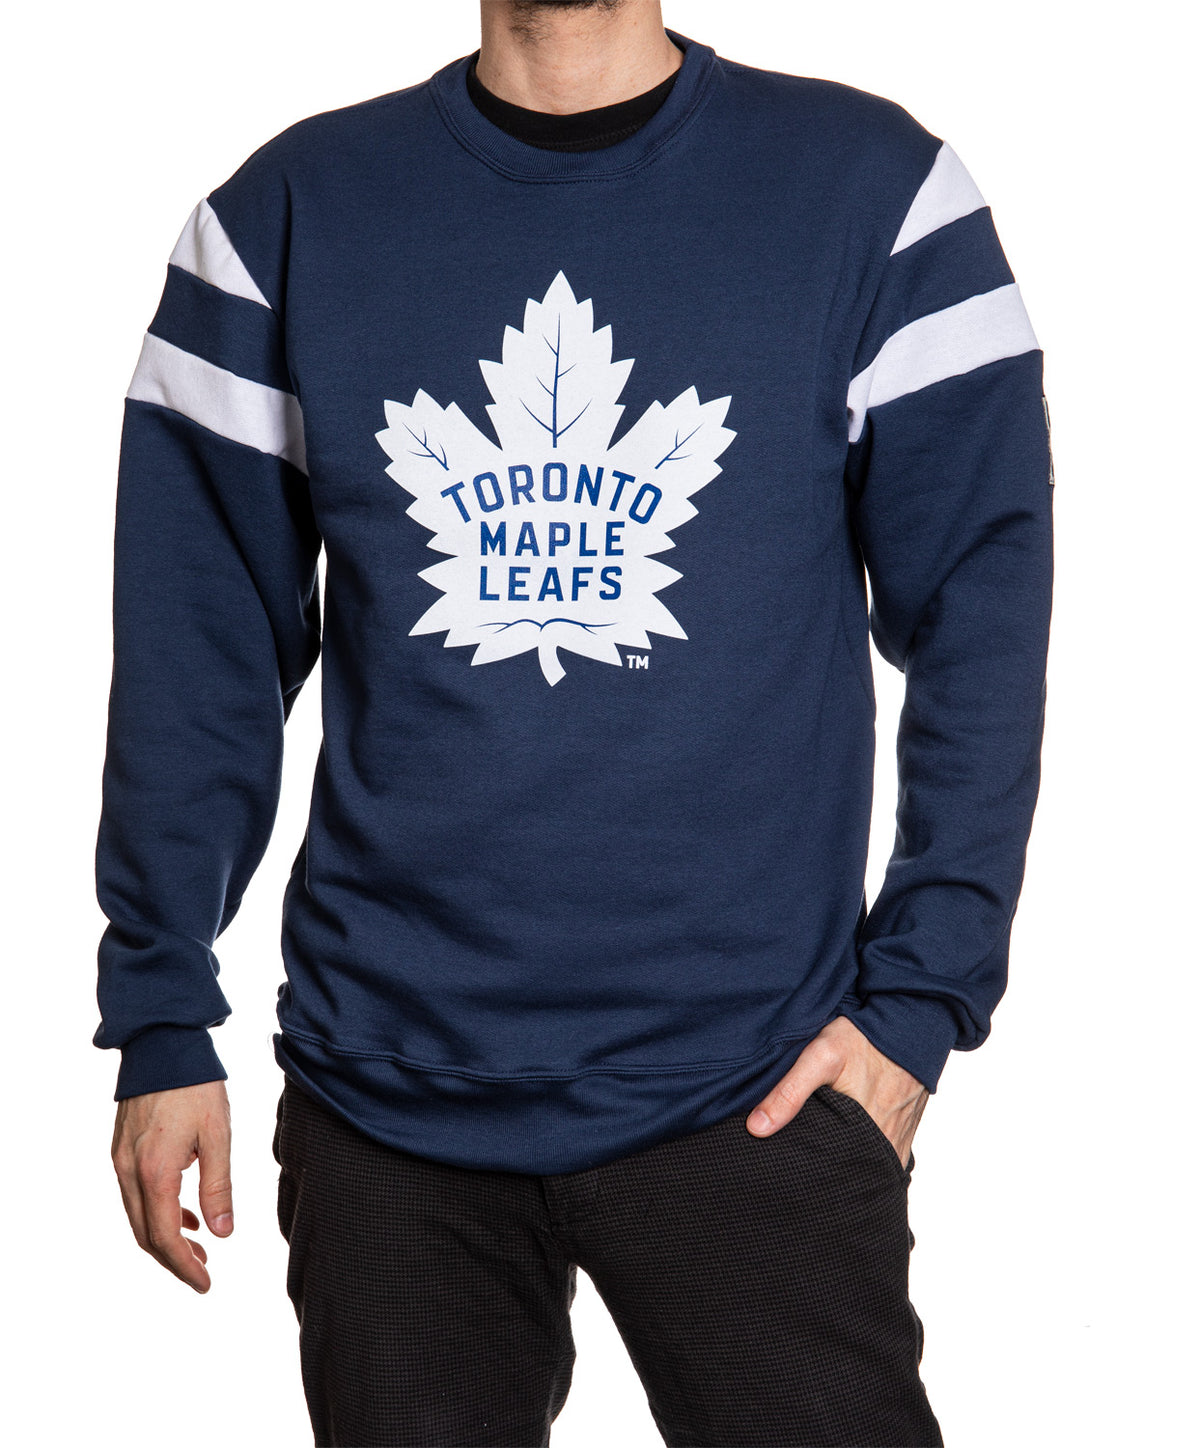 Toronto Maple Leafs Crewneck Sweater Front View